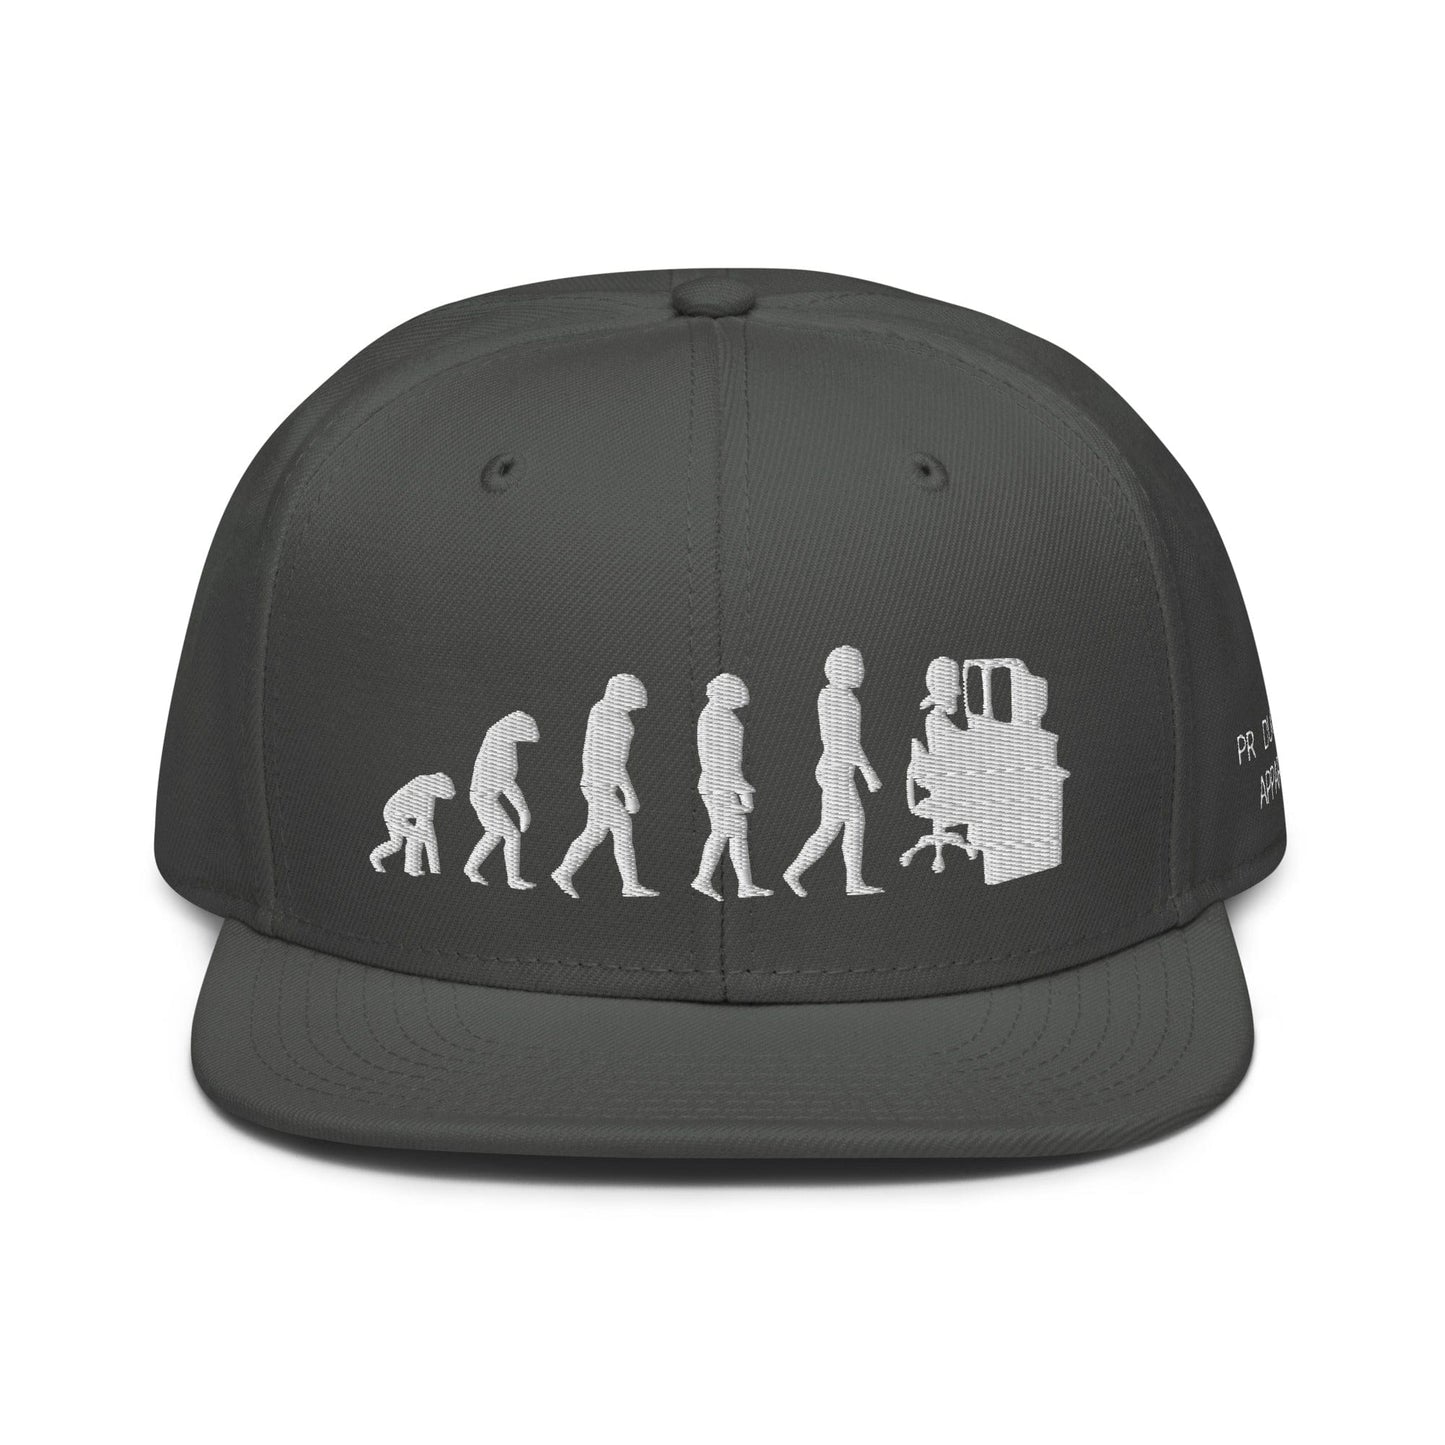 Production Apparel Editor Evolution Hat Charcoal gray